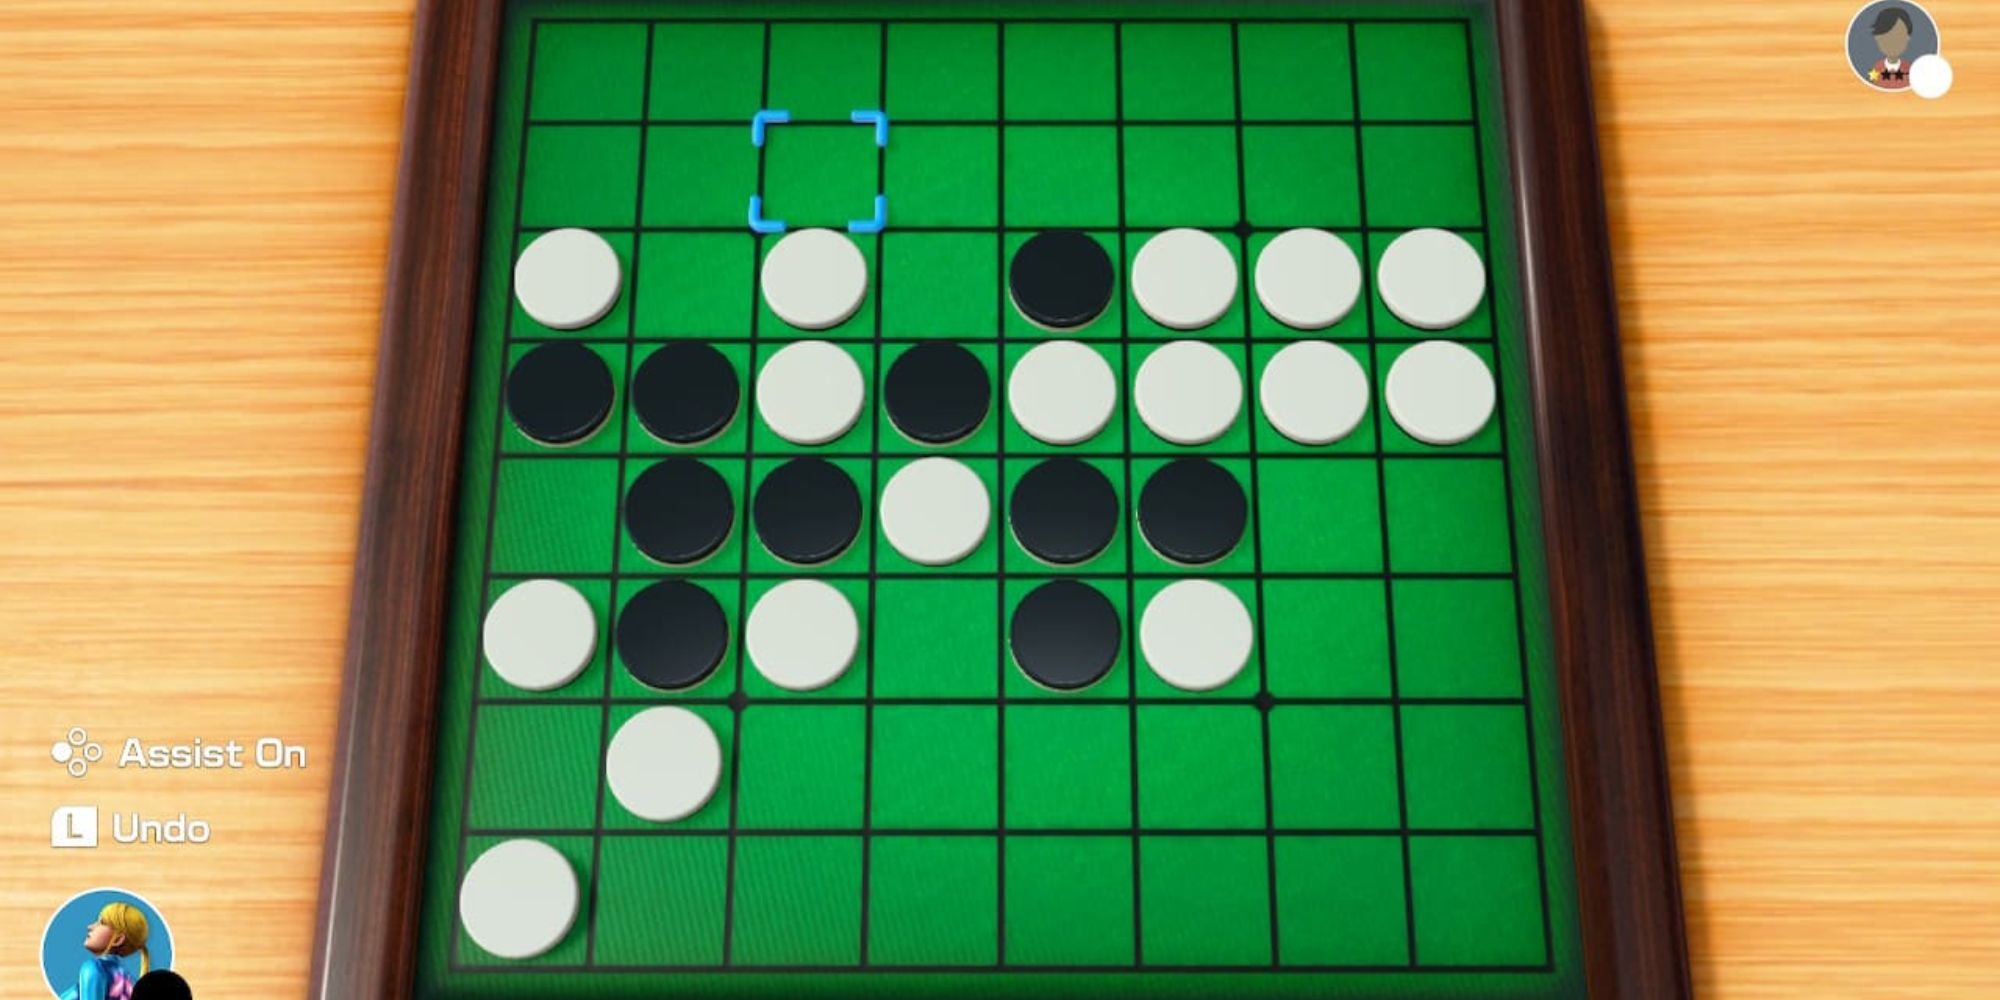 Clubhouse Games an ongoing game of Renegade with black and white pieces spread out across a green board